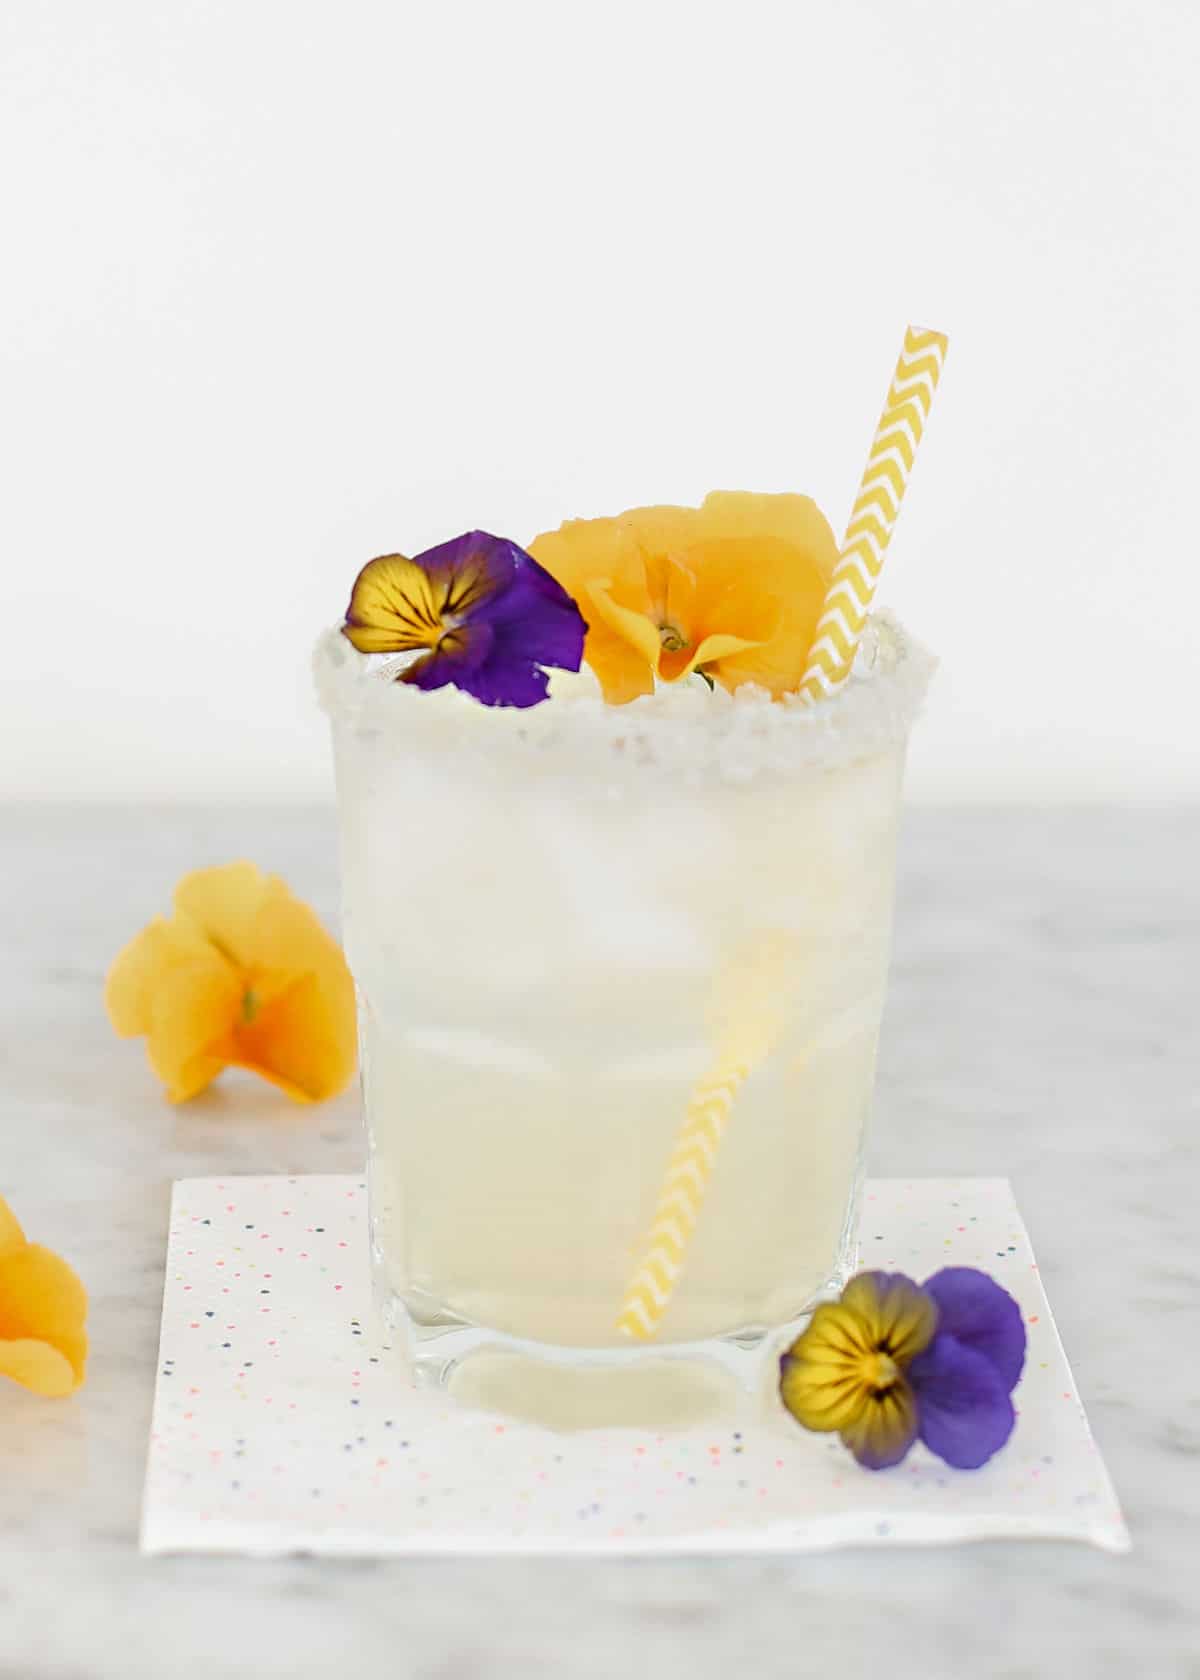 short glass with margarita drink garnished with yellow and purple flowers.